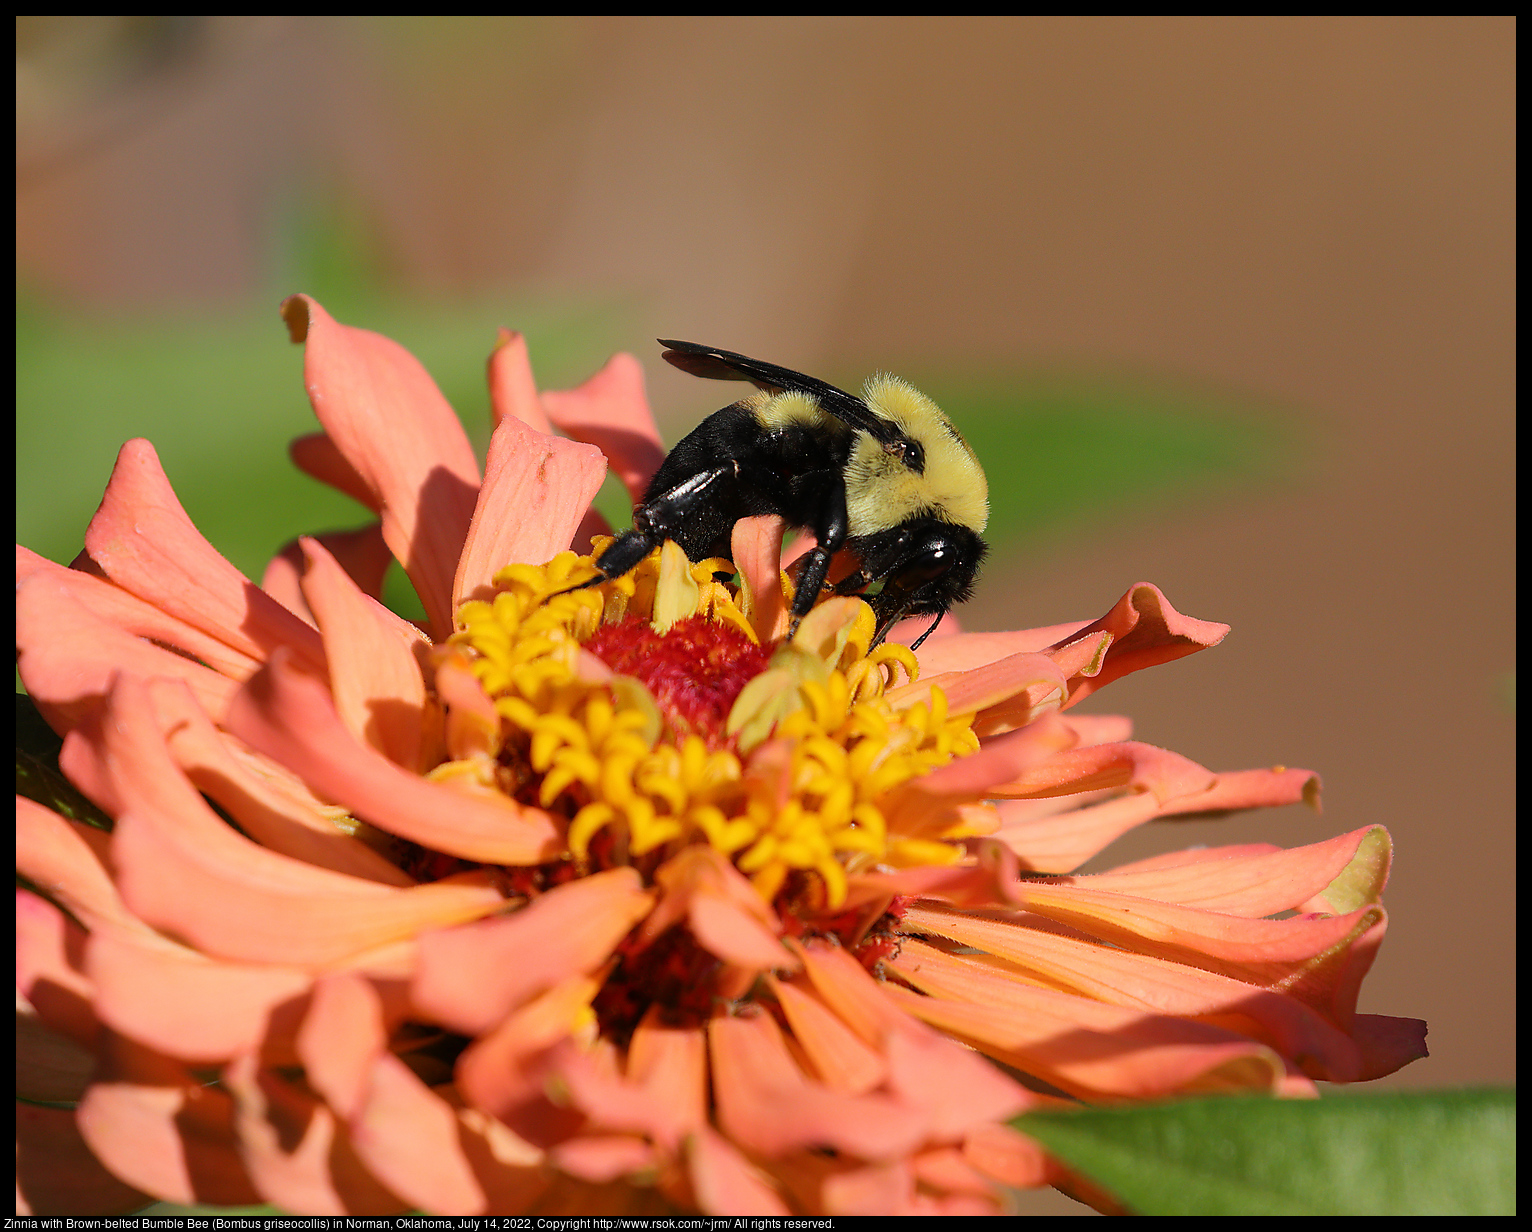 Zinnia with Brown-belted Bumble Bee (Bombus griseocollis) in Norman, Oklahoma, July 14, 2022